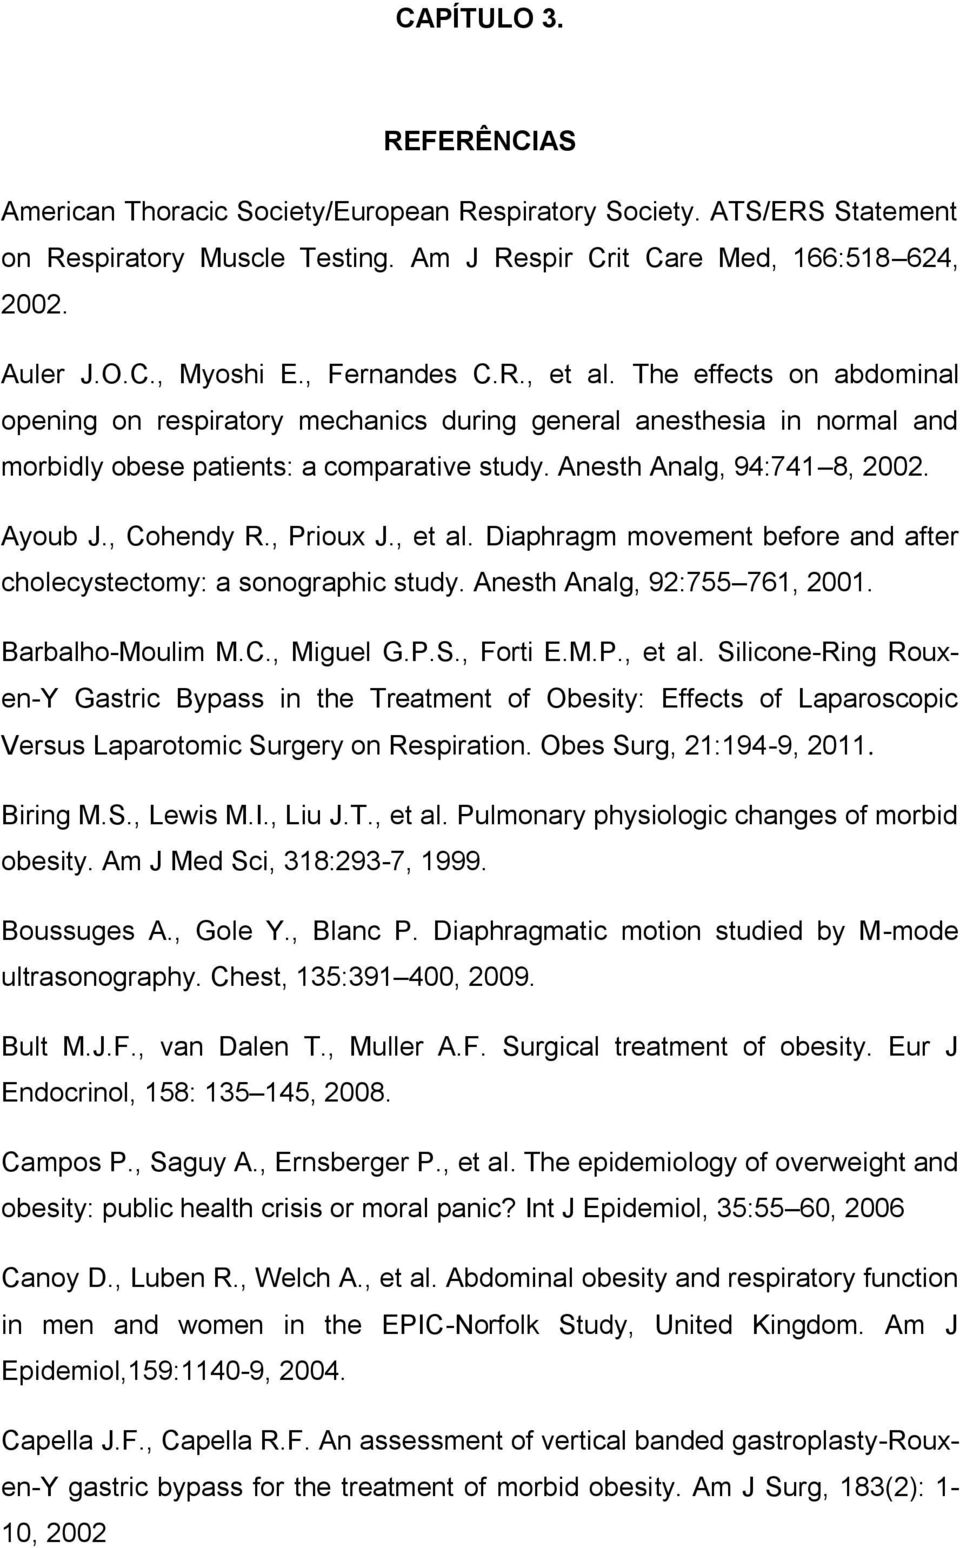 Ayoub J., Cohendy R., Prioux J., et al. Diaphragm movement before and after cholecystectomy: a sonographic study. Anesth Analg, 92:755 761, 2001. Barbalho-Moulim M.C., Miguel G.P.S., Forti E.M.P., et al. Silicone-Ring Rouxen-Y Gastric Bypass in the Treatment of Obesity: Effects of Laparoscopic Versus Laparotomic Surgery on Respiration.